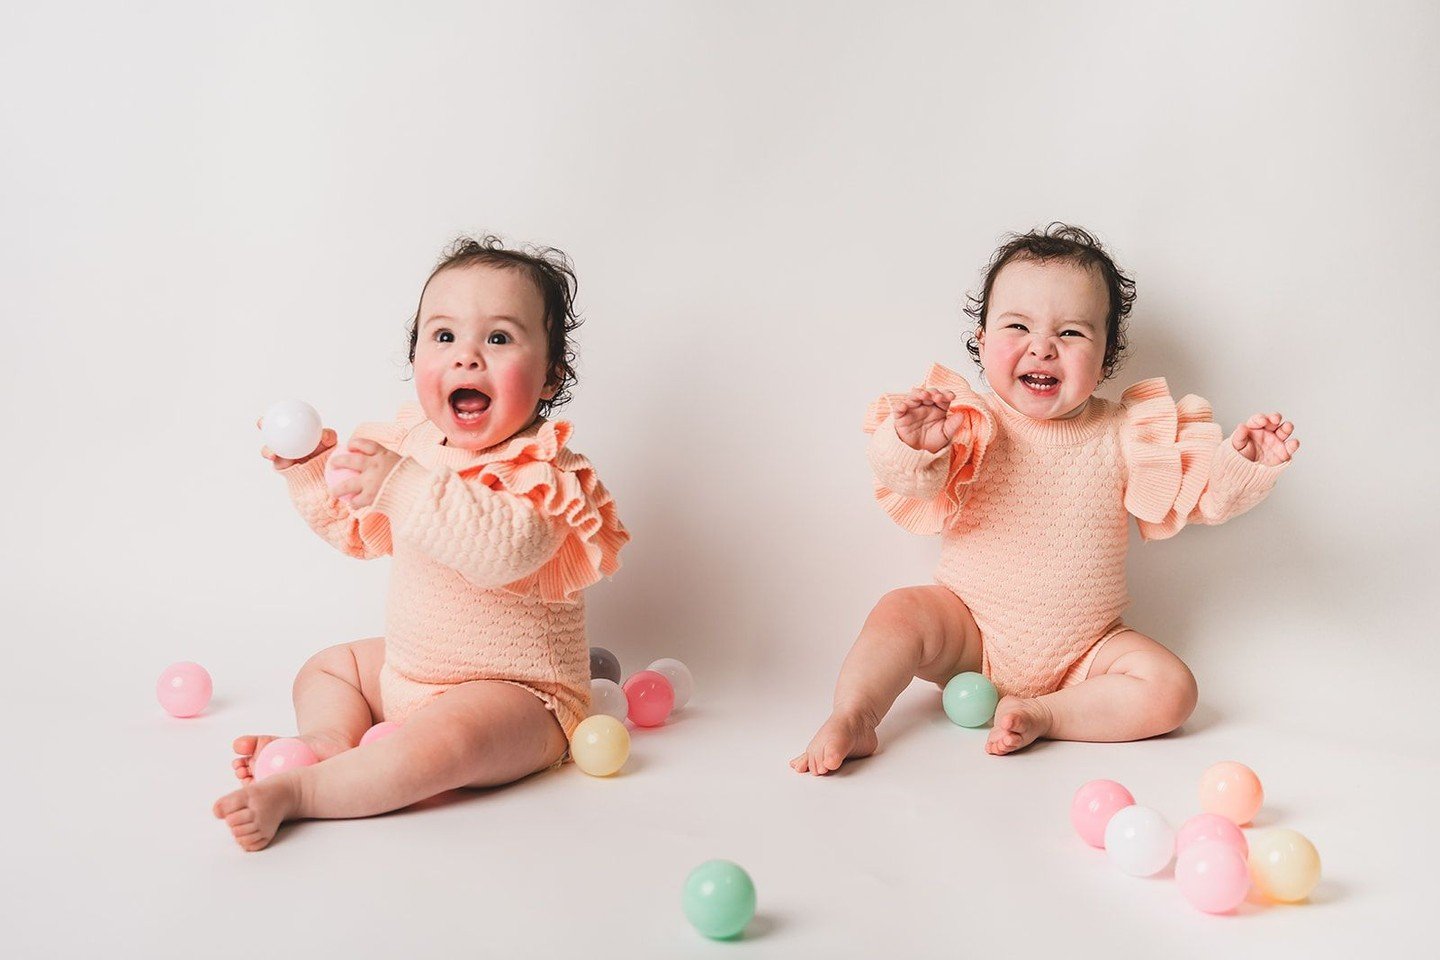 Big smiles for making it to the middle of the week! This cake smash / 1-year-old session was just the sweetest! Double the smiles 😍